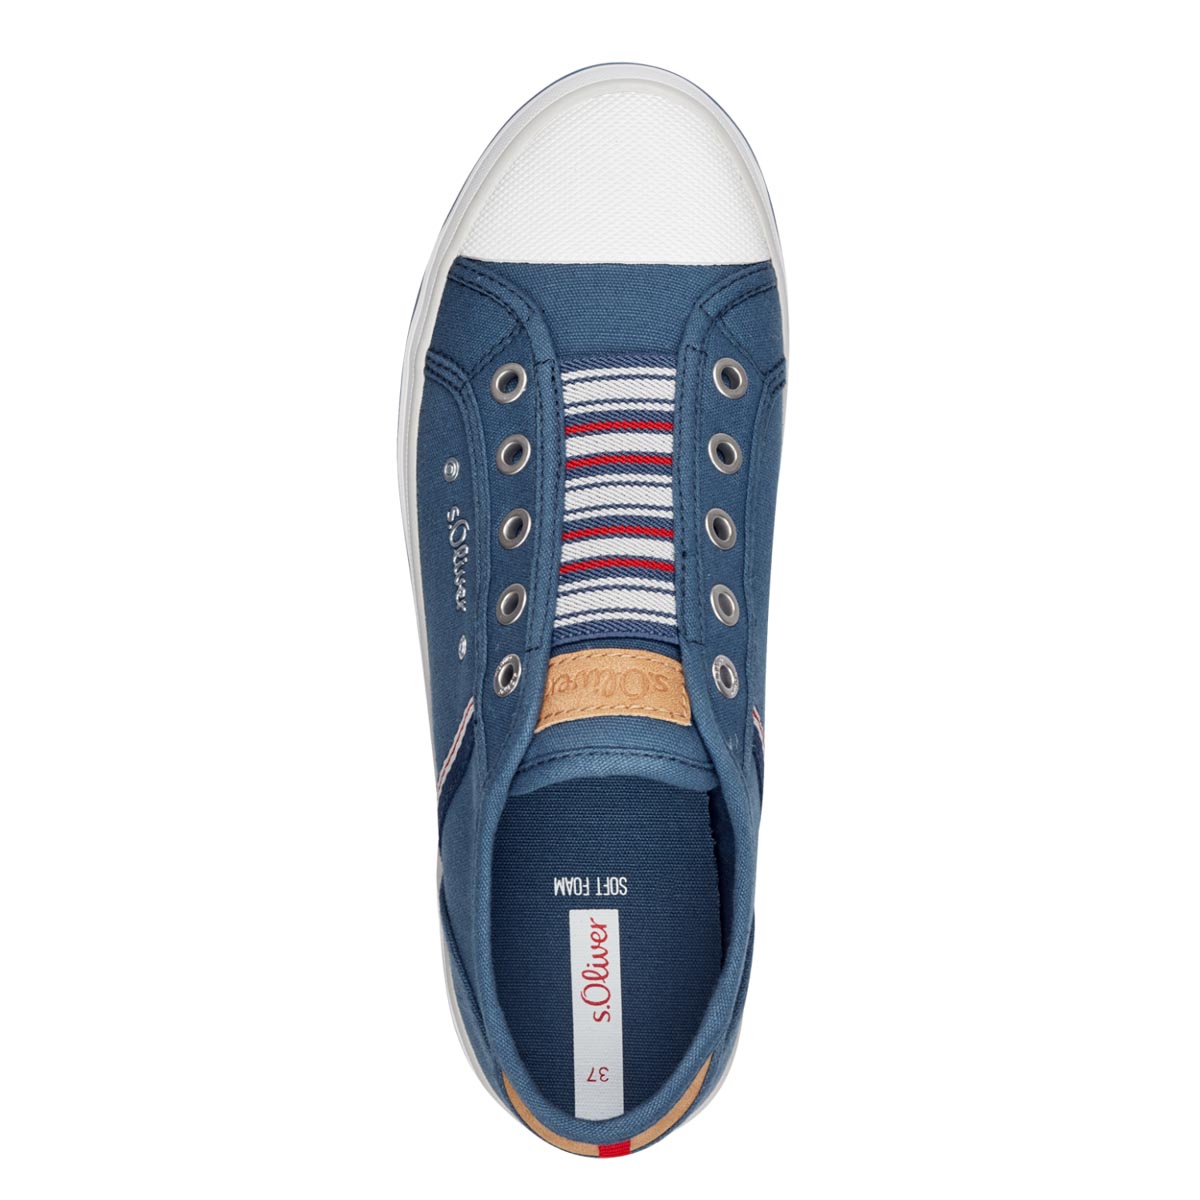 Side view of the S Oliver navy canvas sneakers, showcasing the white toe cap and sole.